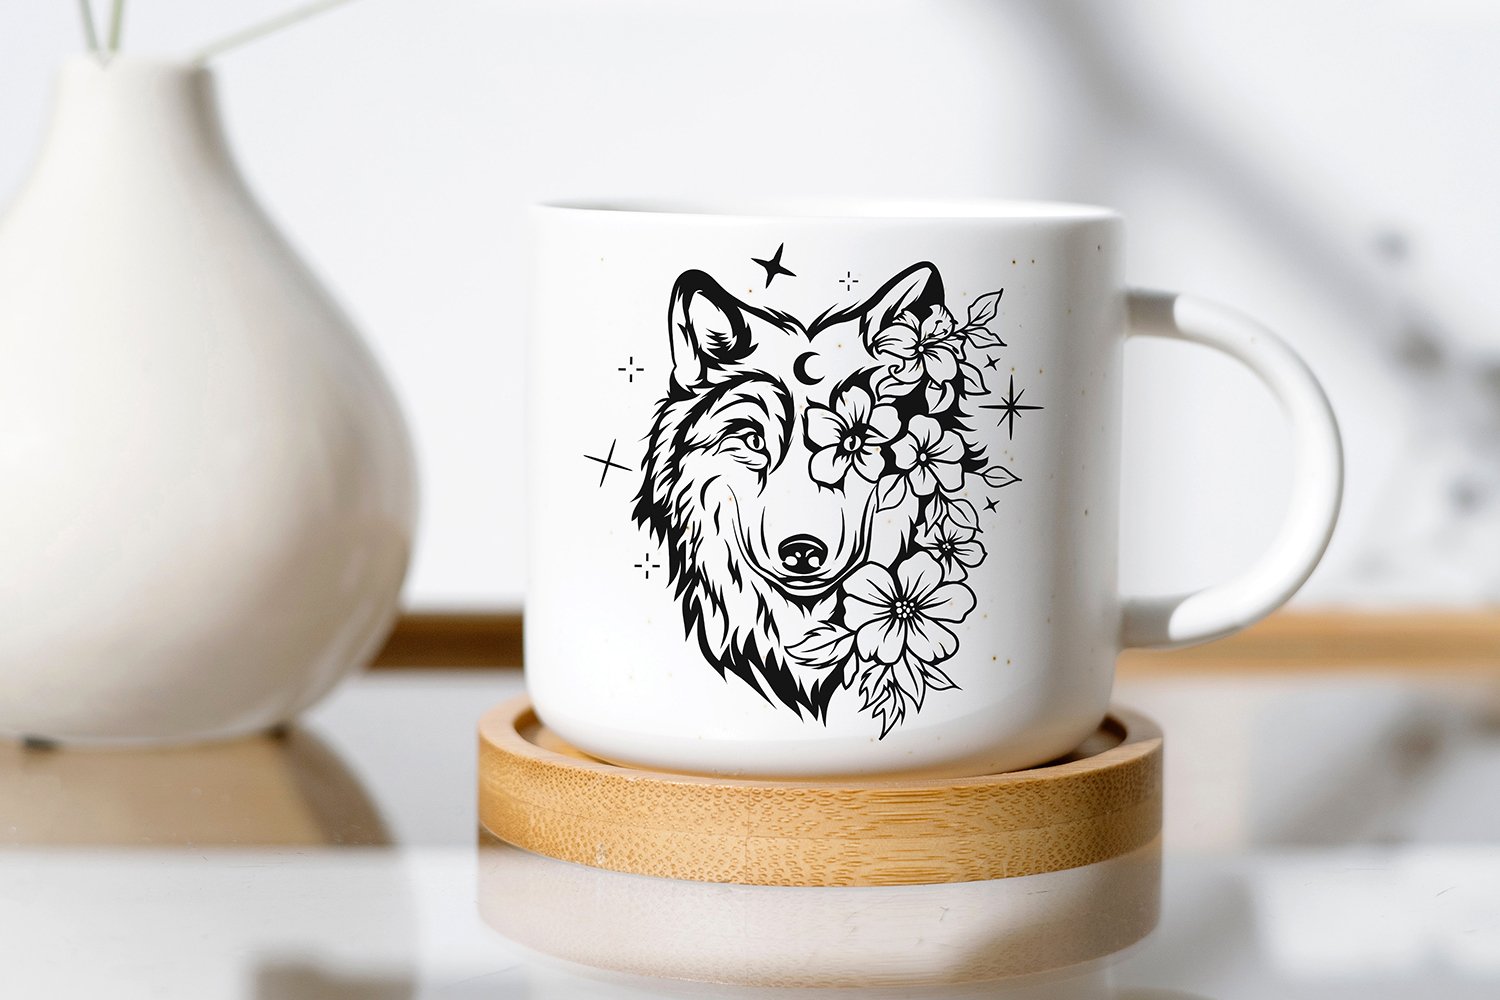 White coffee mug with a wolf design on it.